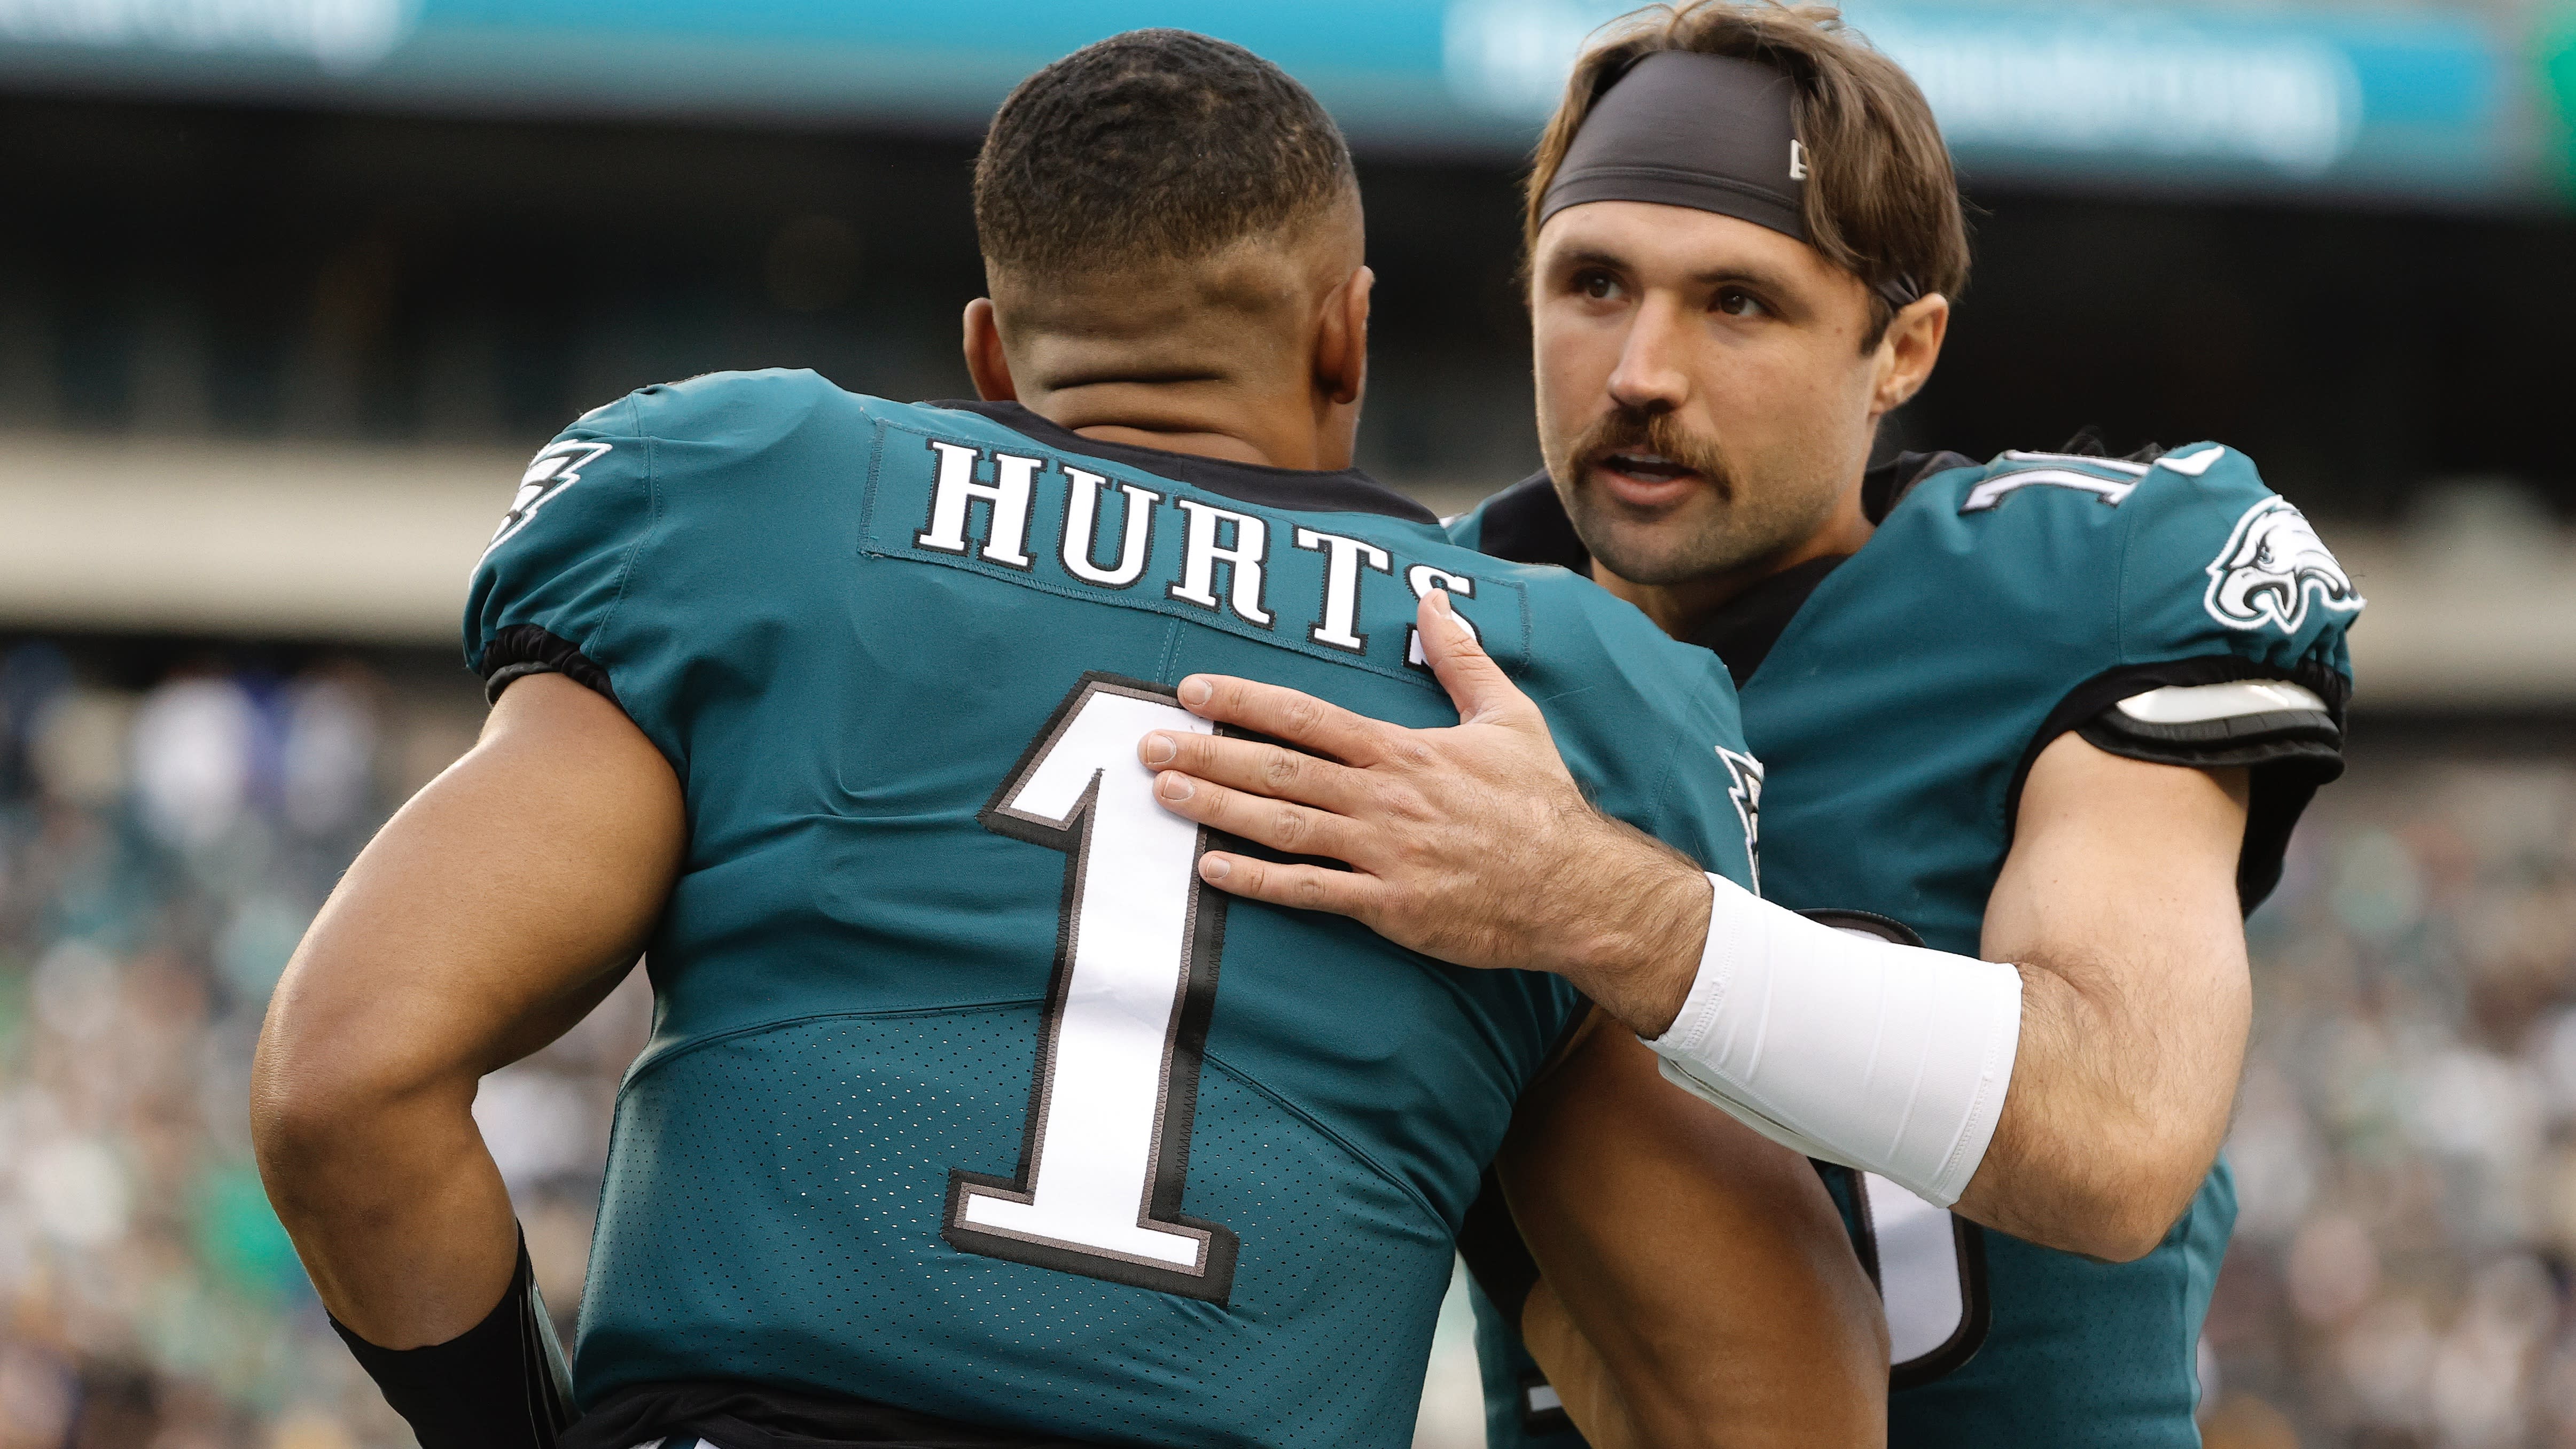 Eagles-Cowboys final score: Philly's backups show some fight in